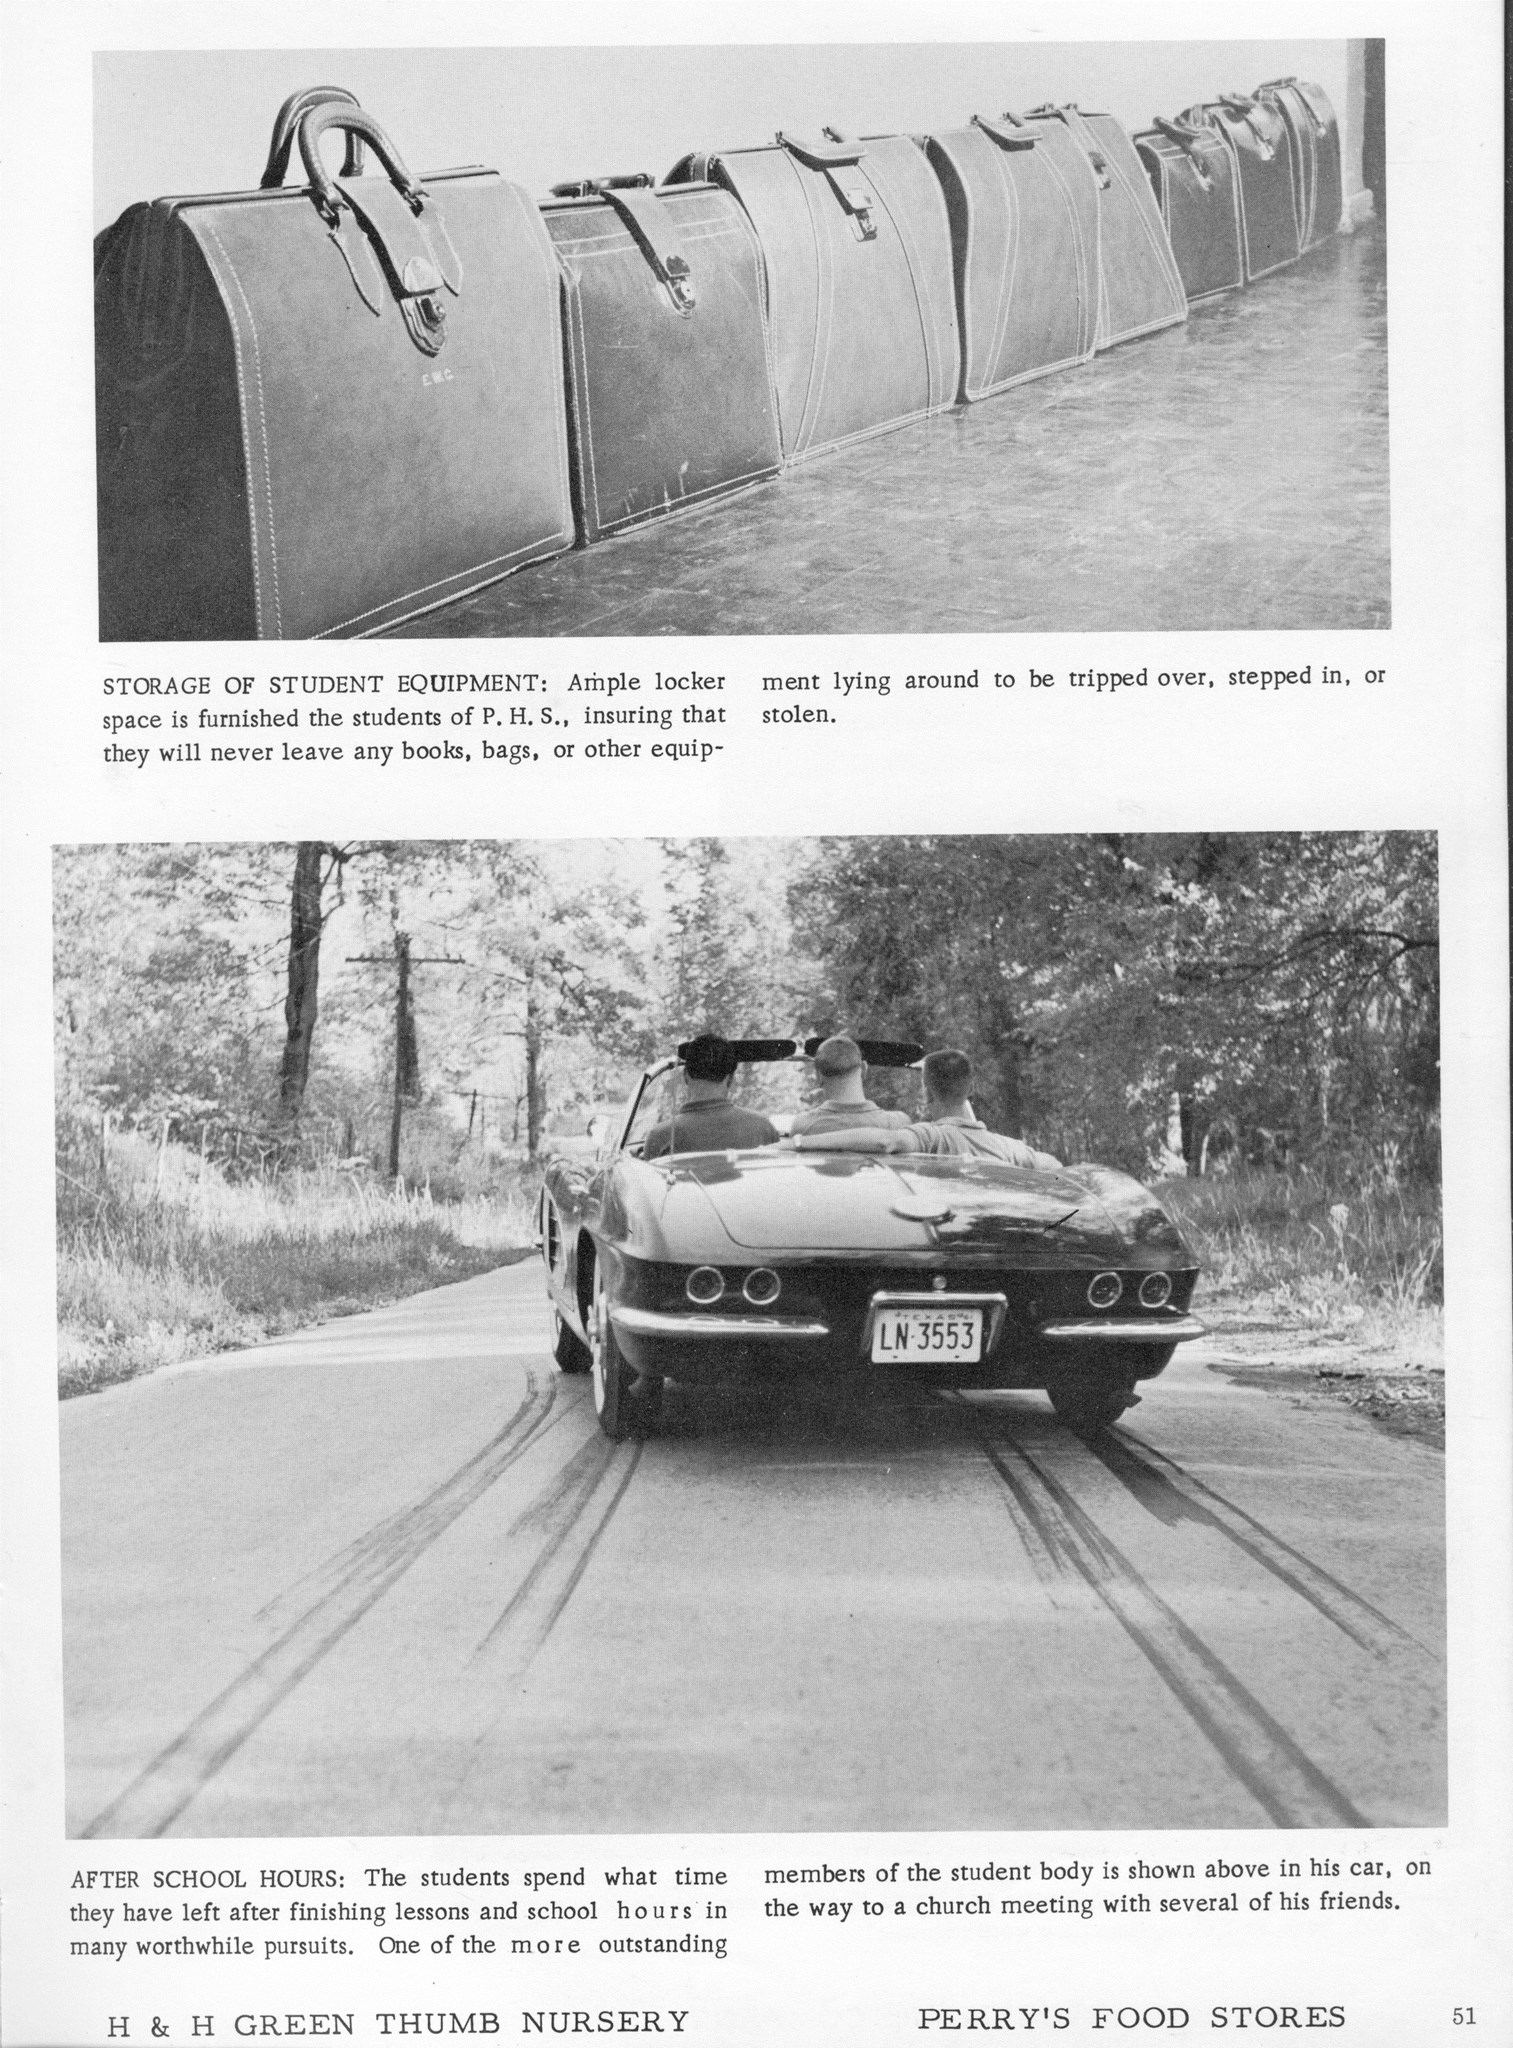 ../../../Images/Large/1961/Arclight-1961-pg0051.jpg